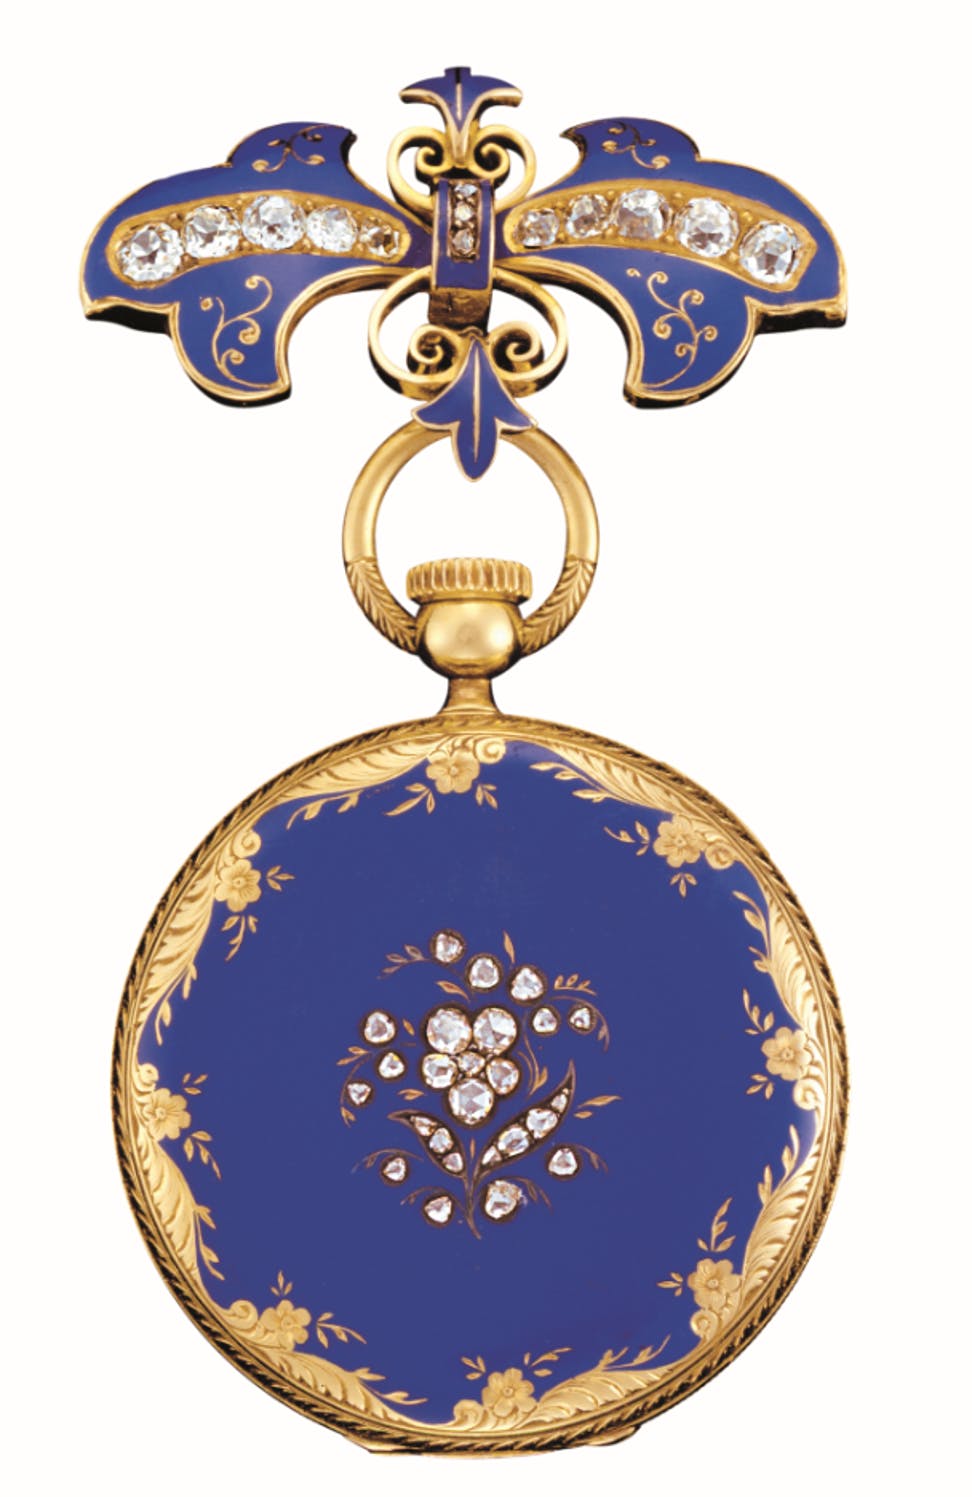 The Patek Philippe Pocket Watch ordered by Queen Victoria in 1851, with a Gold Case in Blue Enamel and Diamond set flowers.